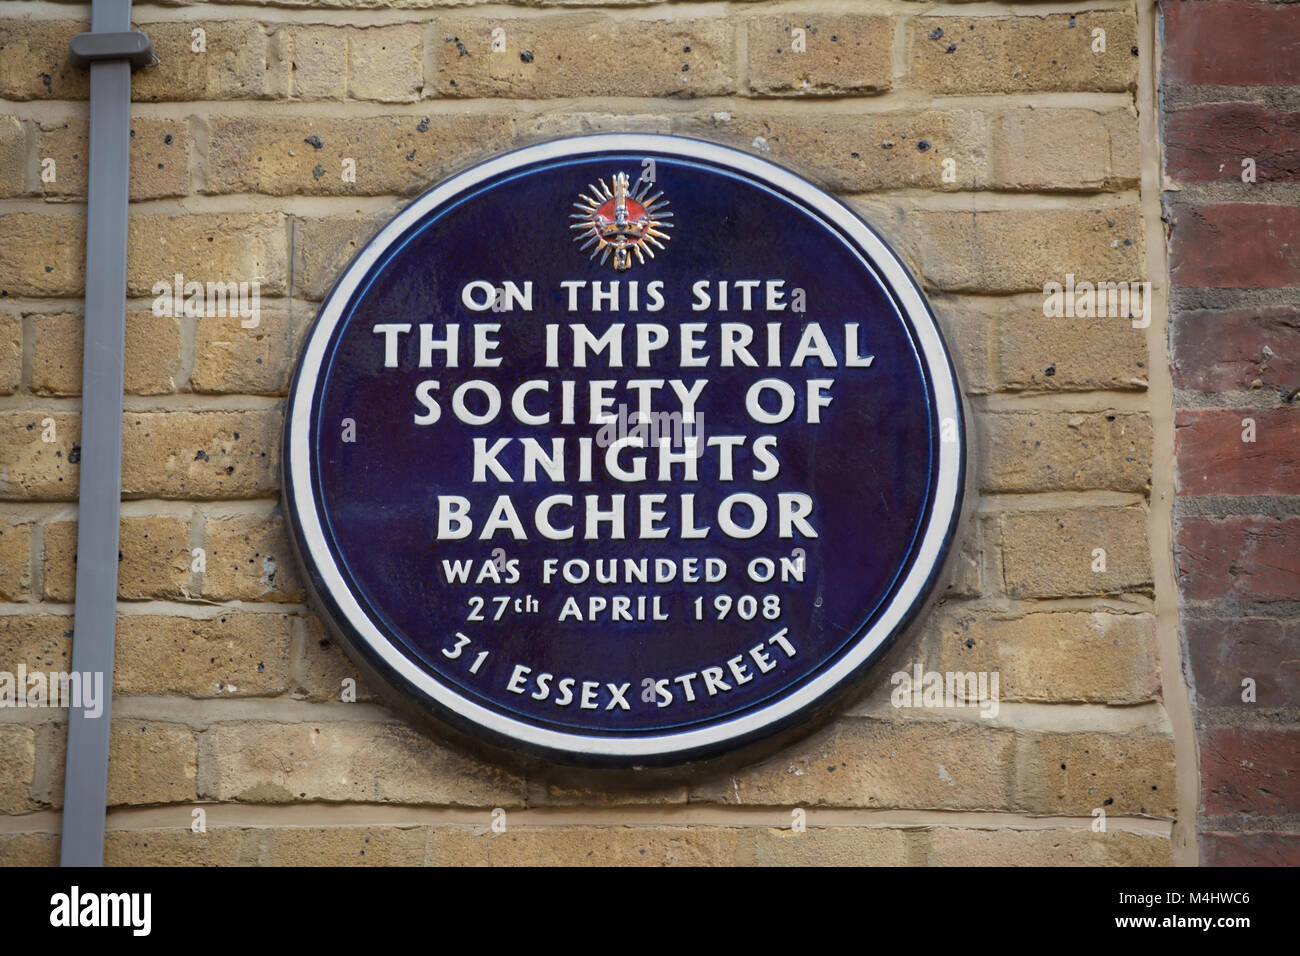 plaque marking the site of the 1908 founding of the imperial society of knights bachelor, essex street, london, england Stock Photo